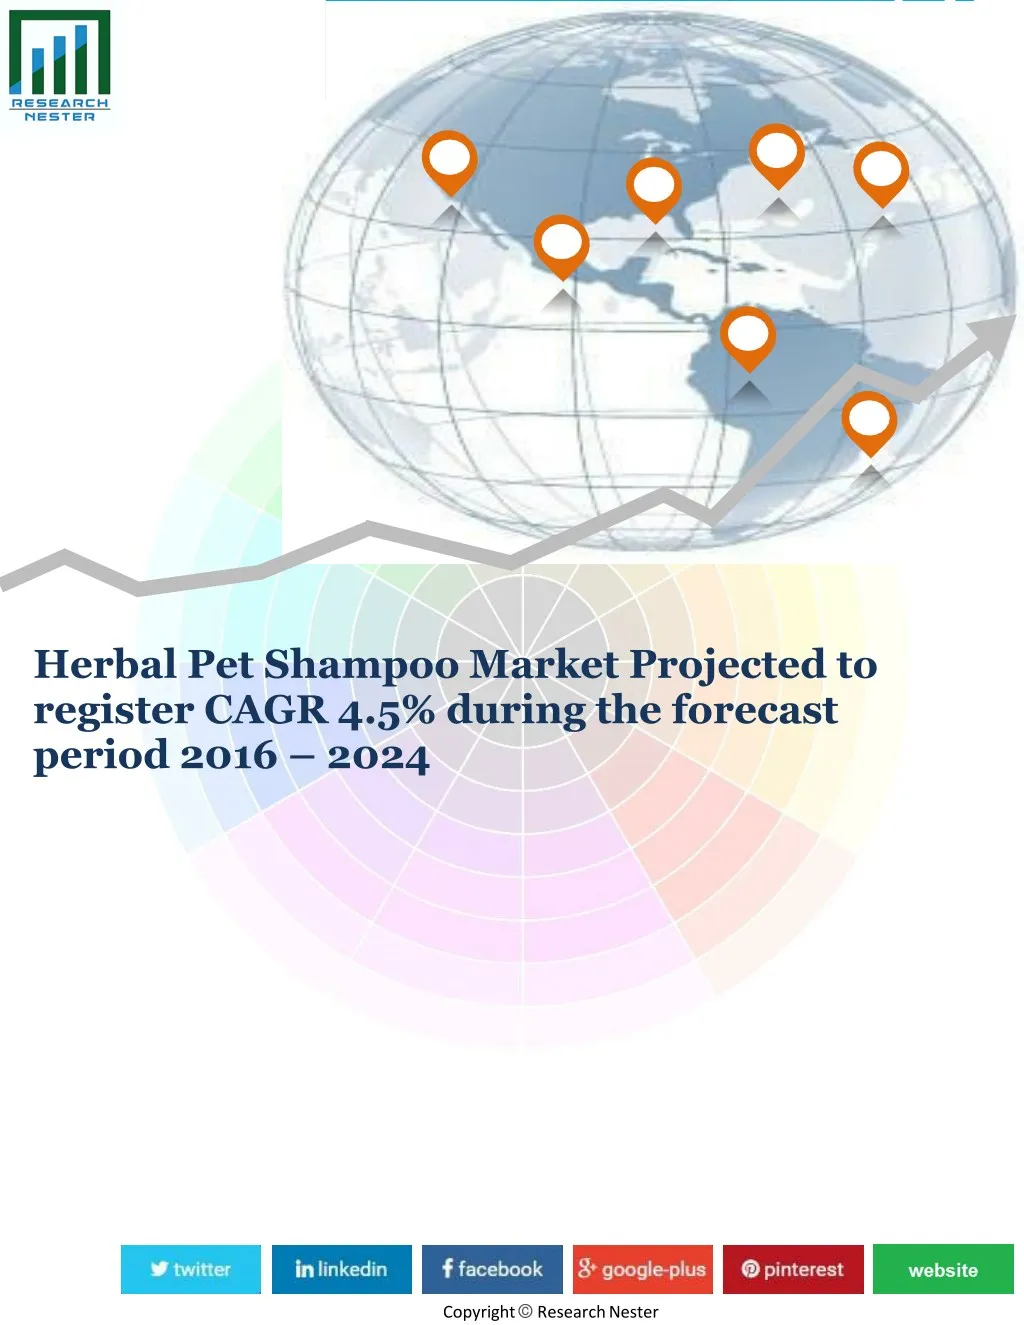 herbal pet shampoo market projected to register